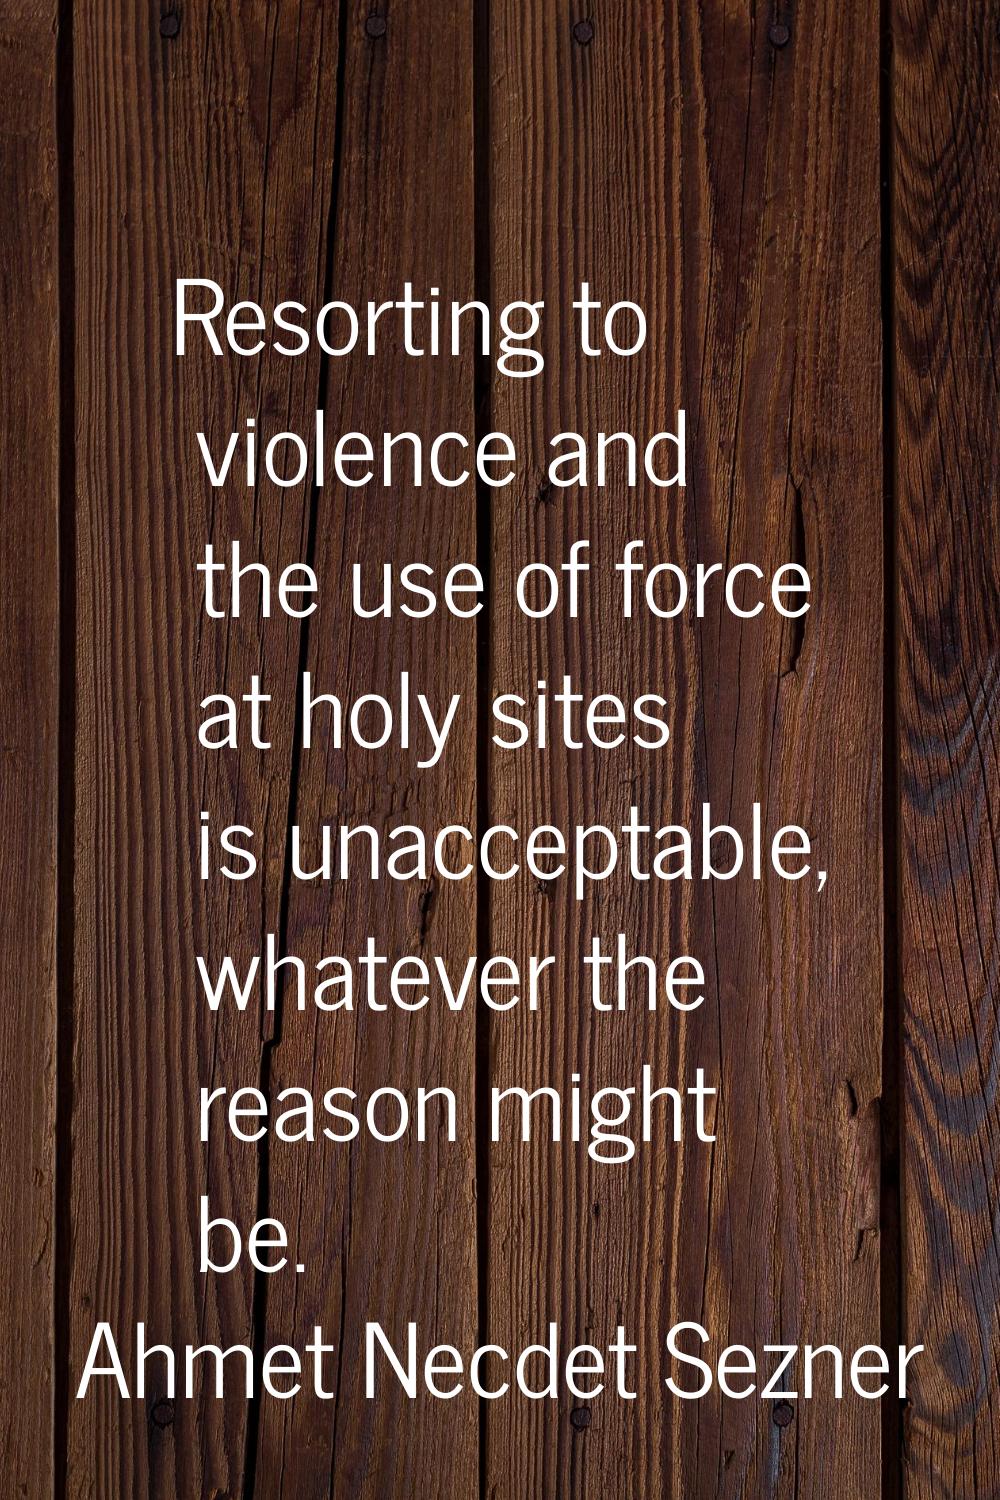 Resorting to violence and the use of force at holy sites is unacceptable, whatever the reason might